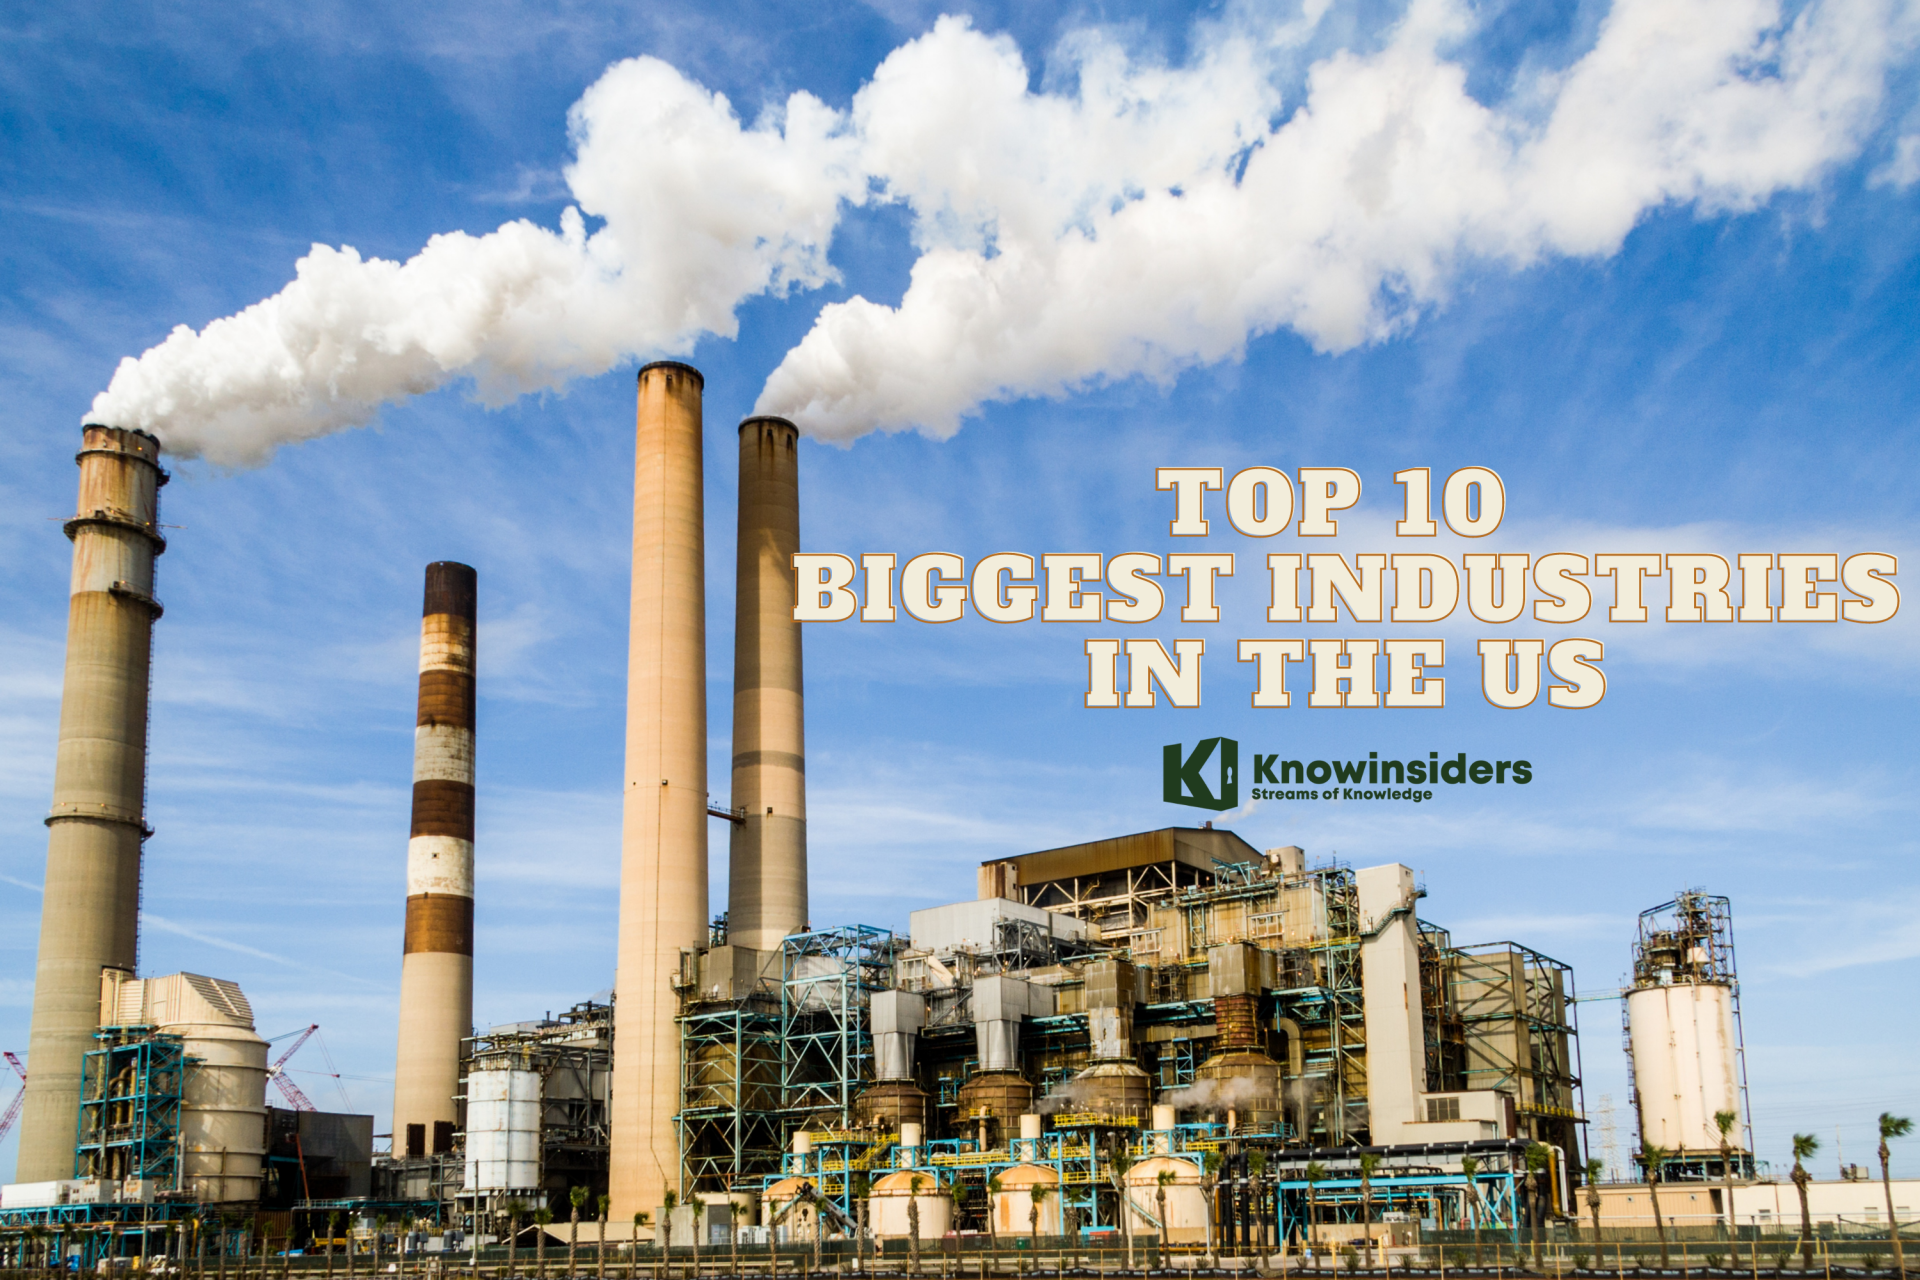 Top 10 Biggest Industries In The US